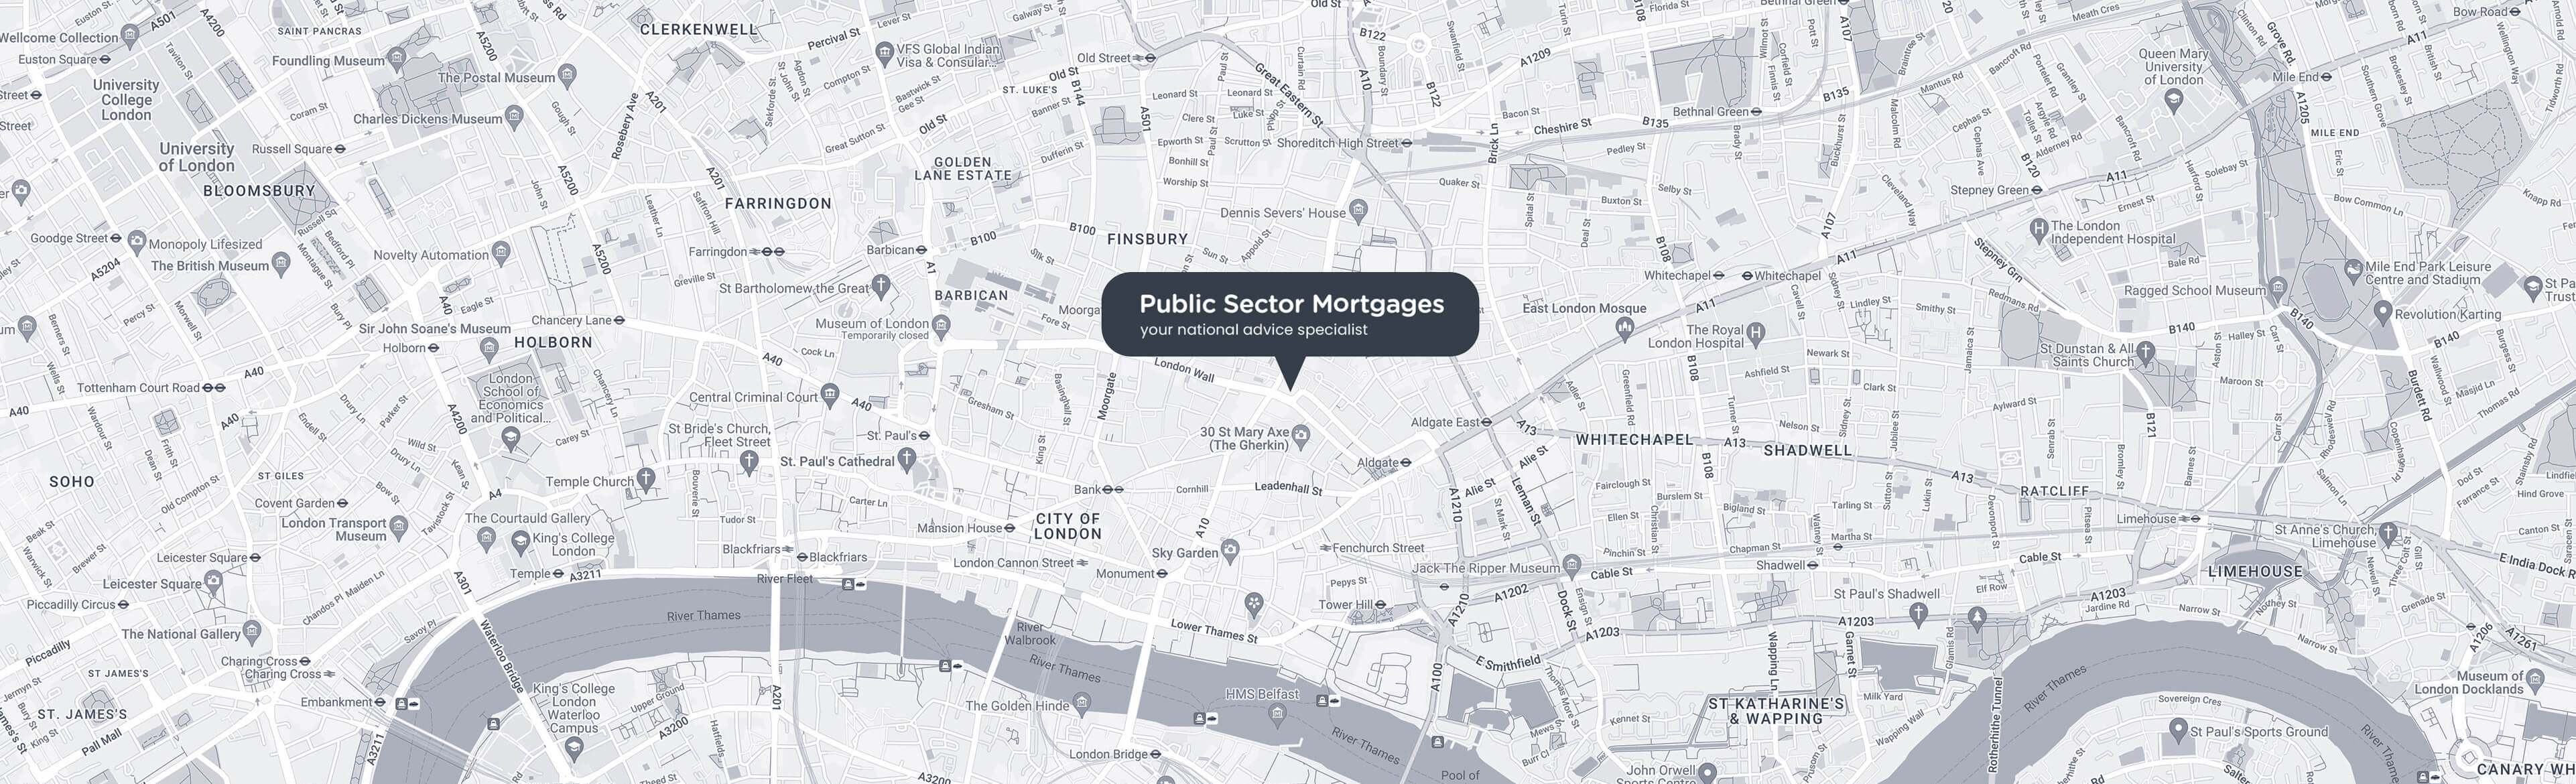 Image of a map displaying Public Sector Mortgages location